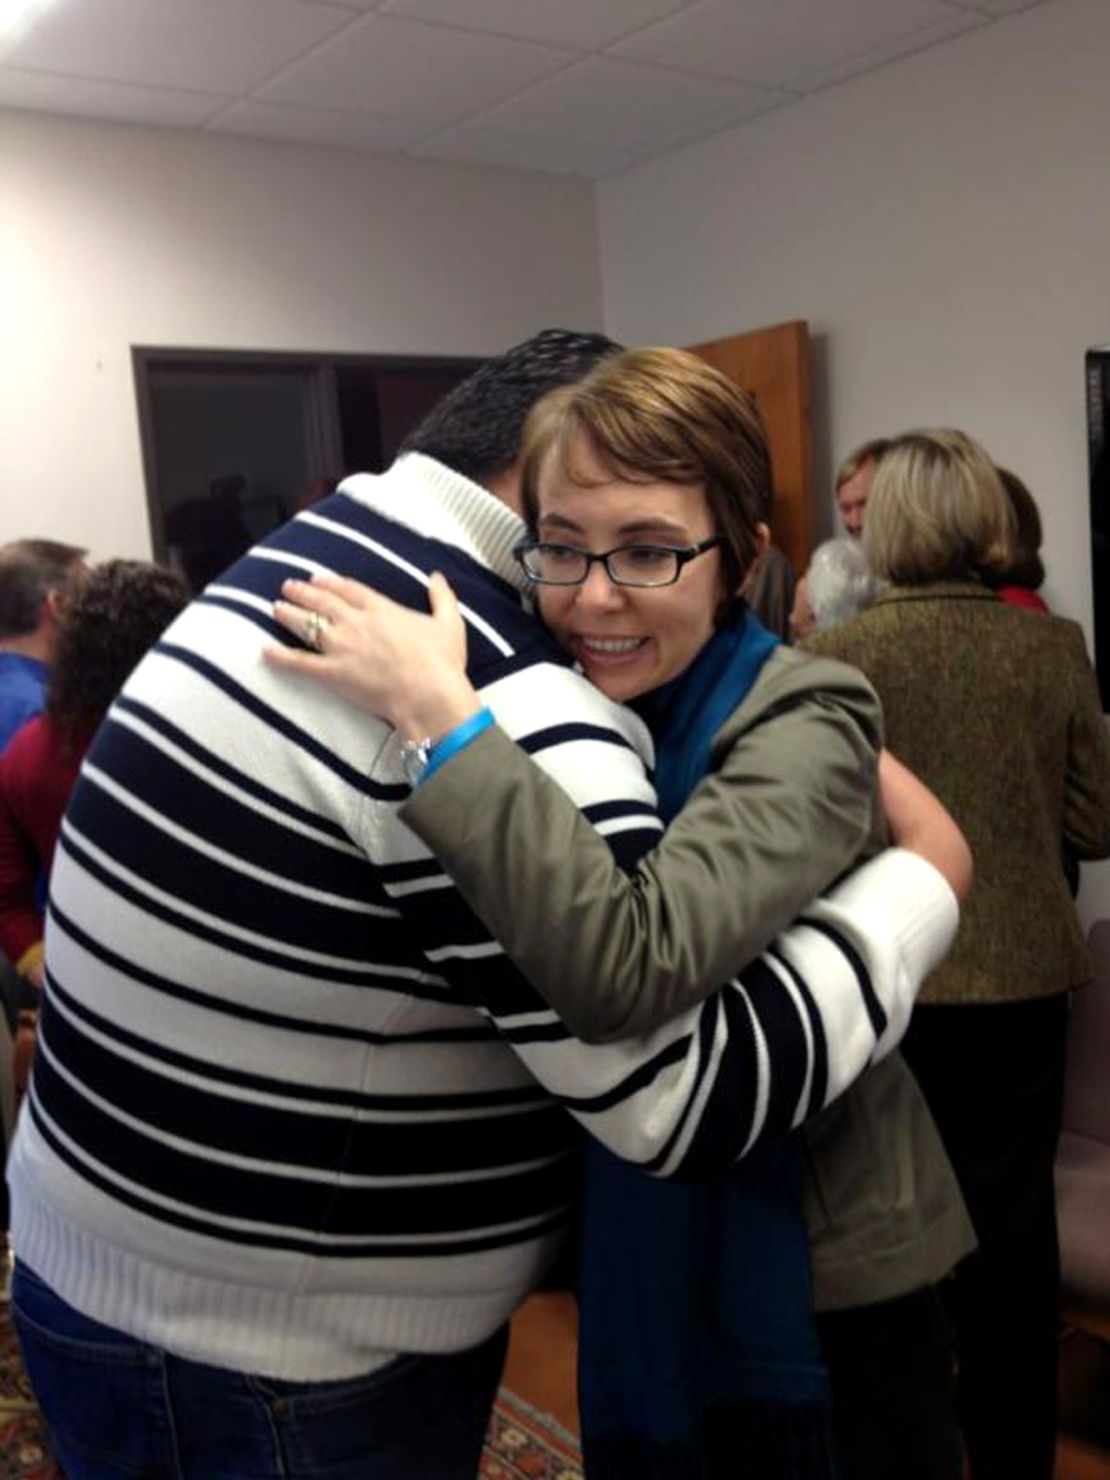 On her last day in office, Rep. Gabrielle Giffords hugs Daniel Hernandez, the former intern who saved her life.